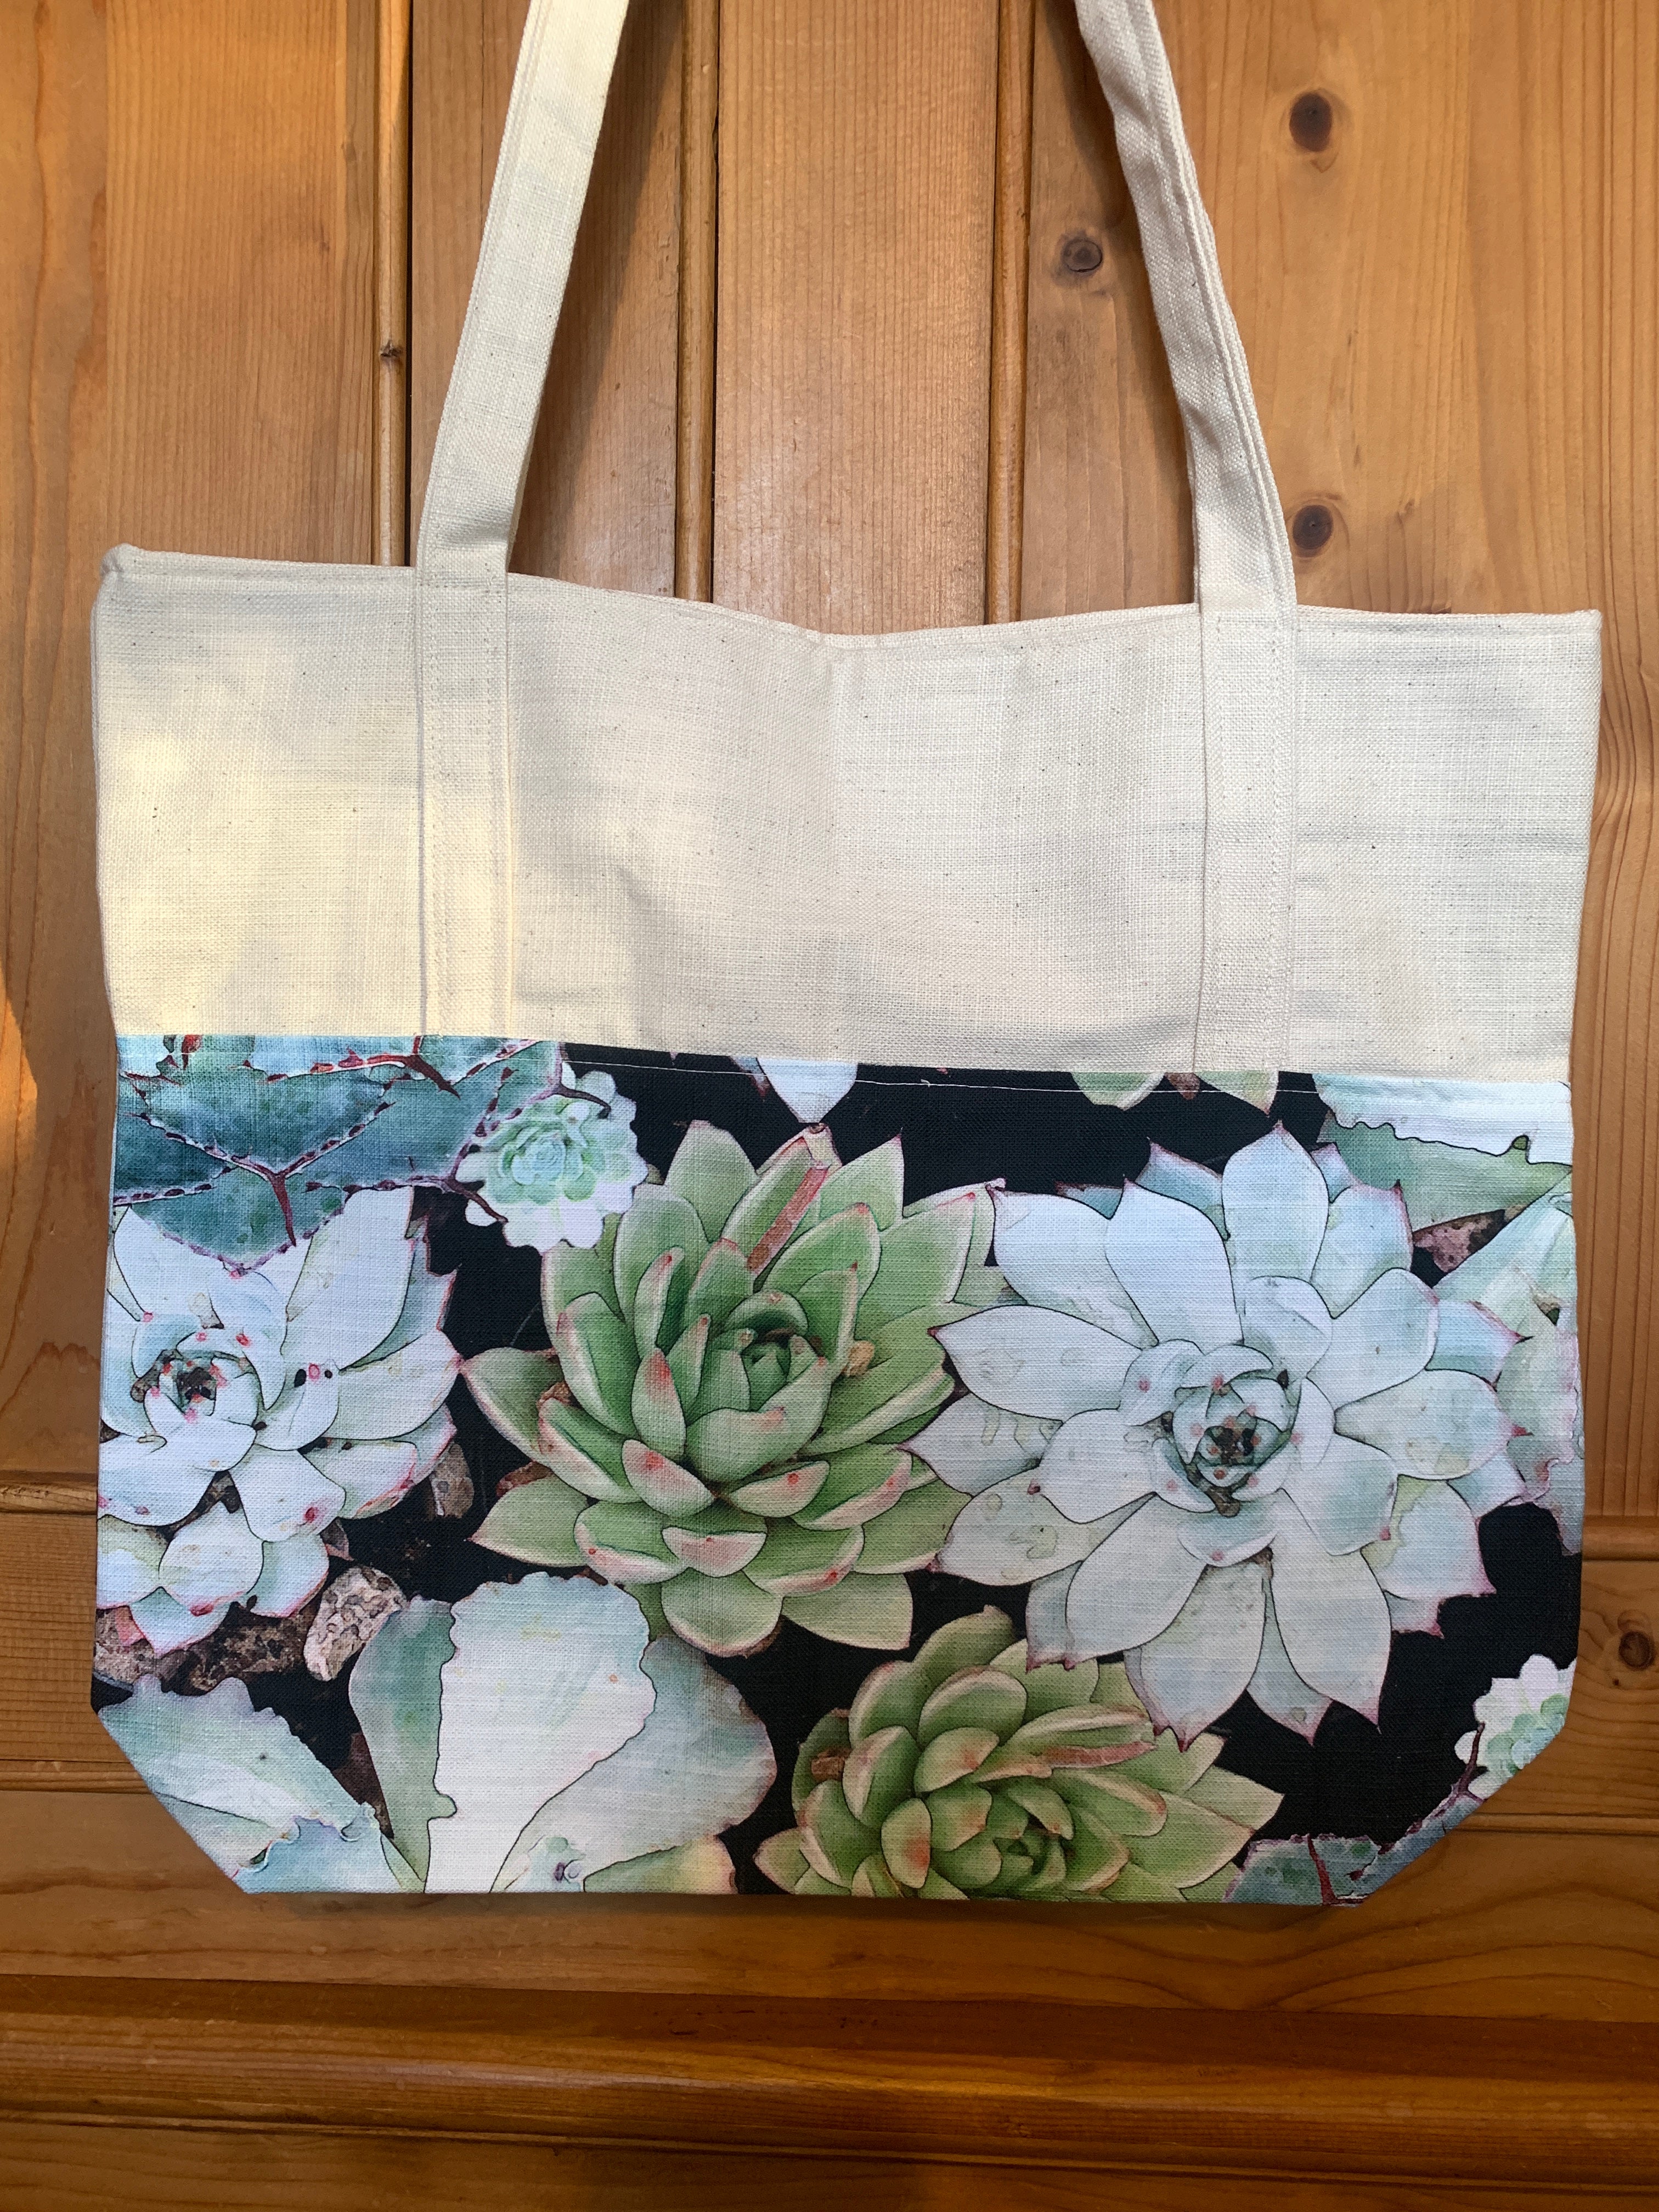 Tote in Succulent on Black